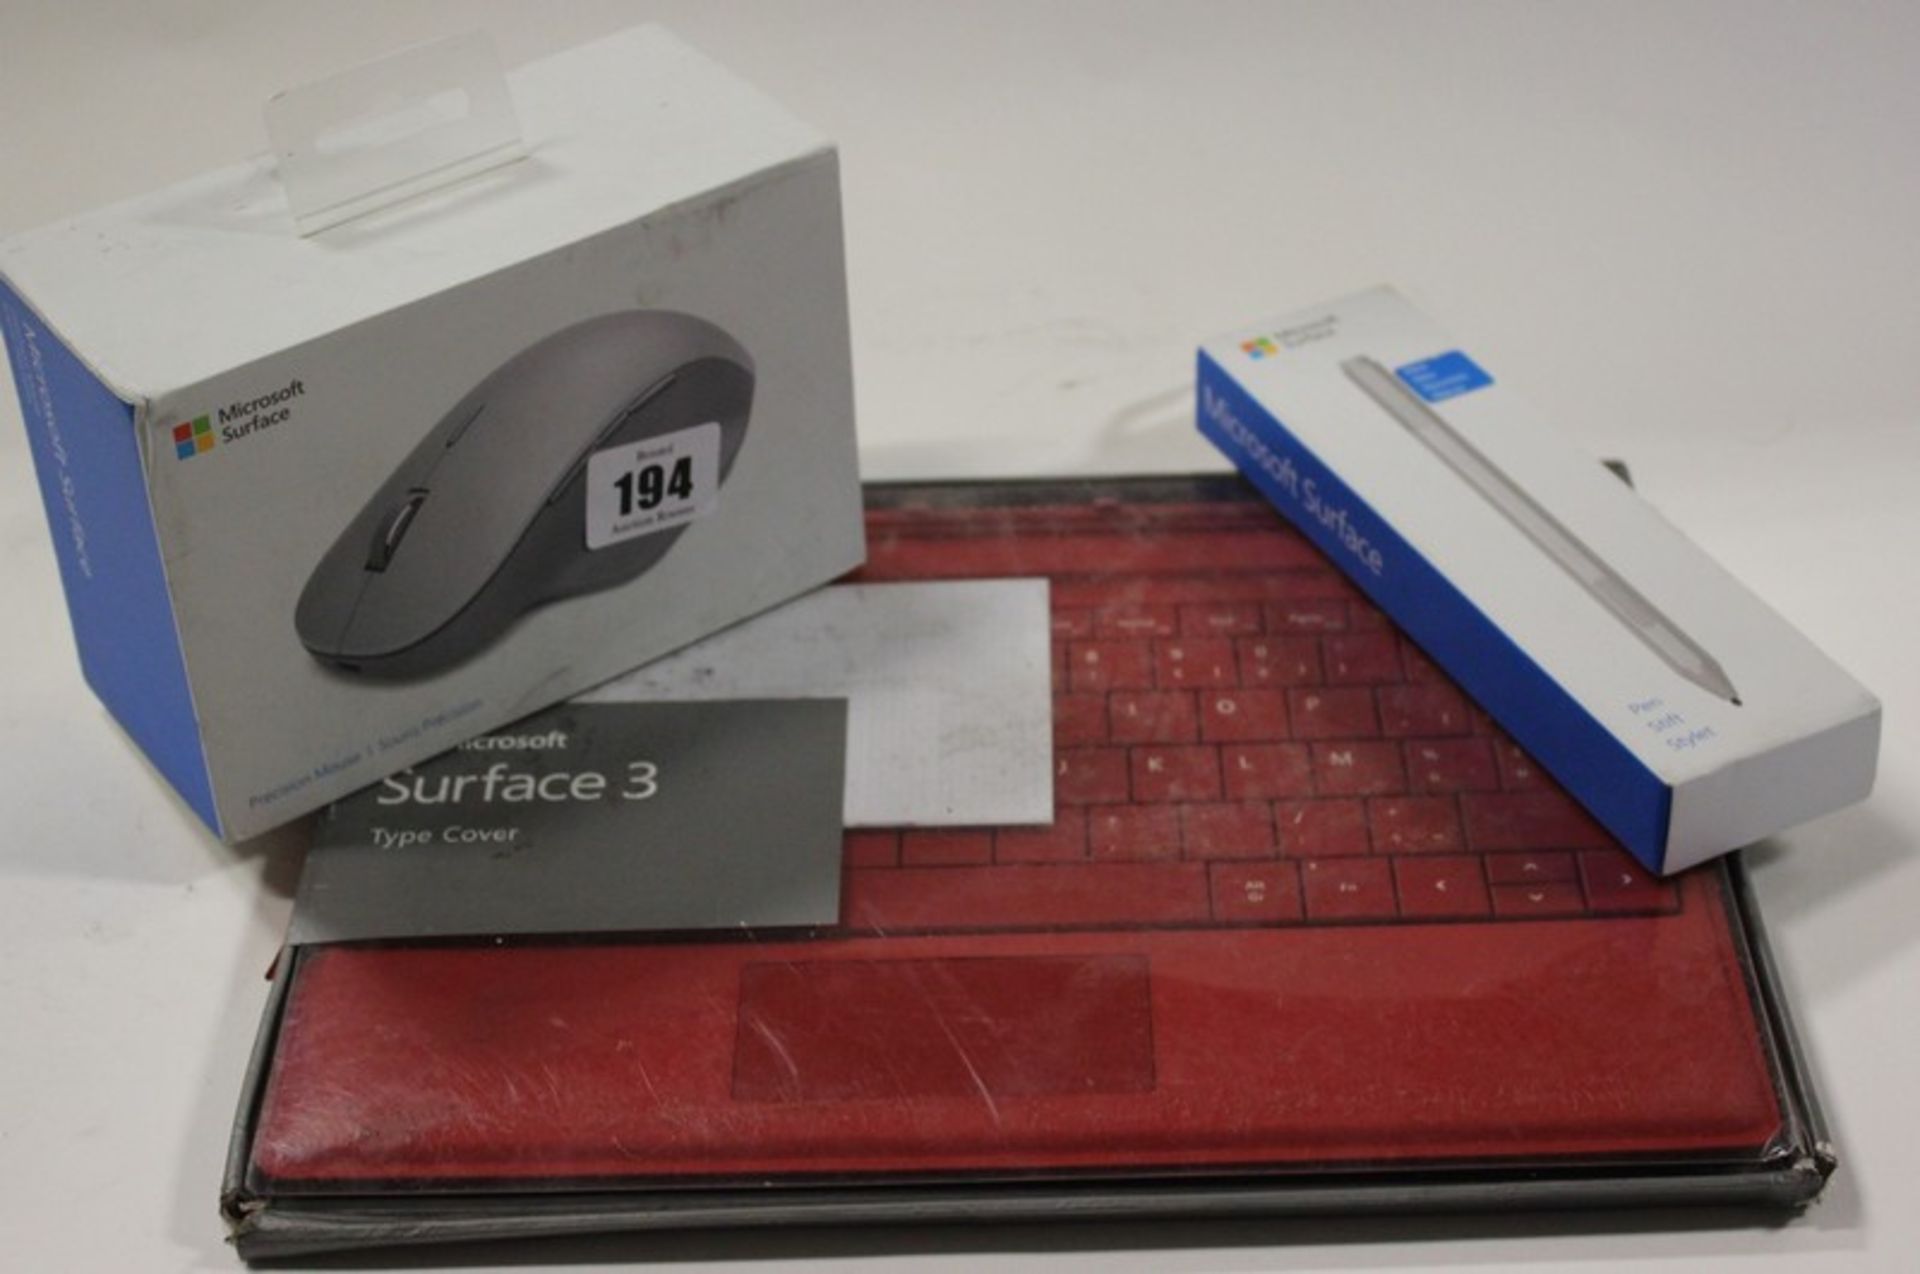 A Microsoft Surface precision mouse model: 1818 (Boxed as new), Microsoft Surface Pen stift stylet